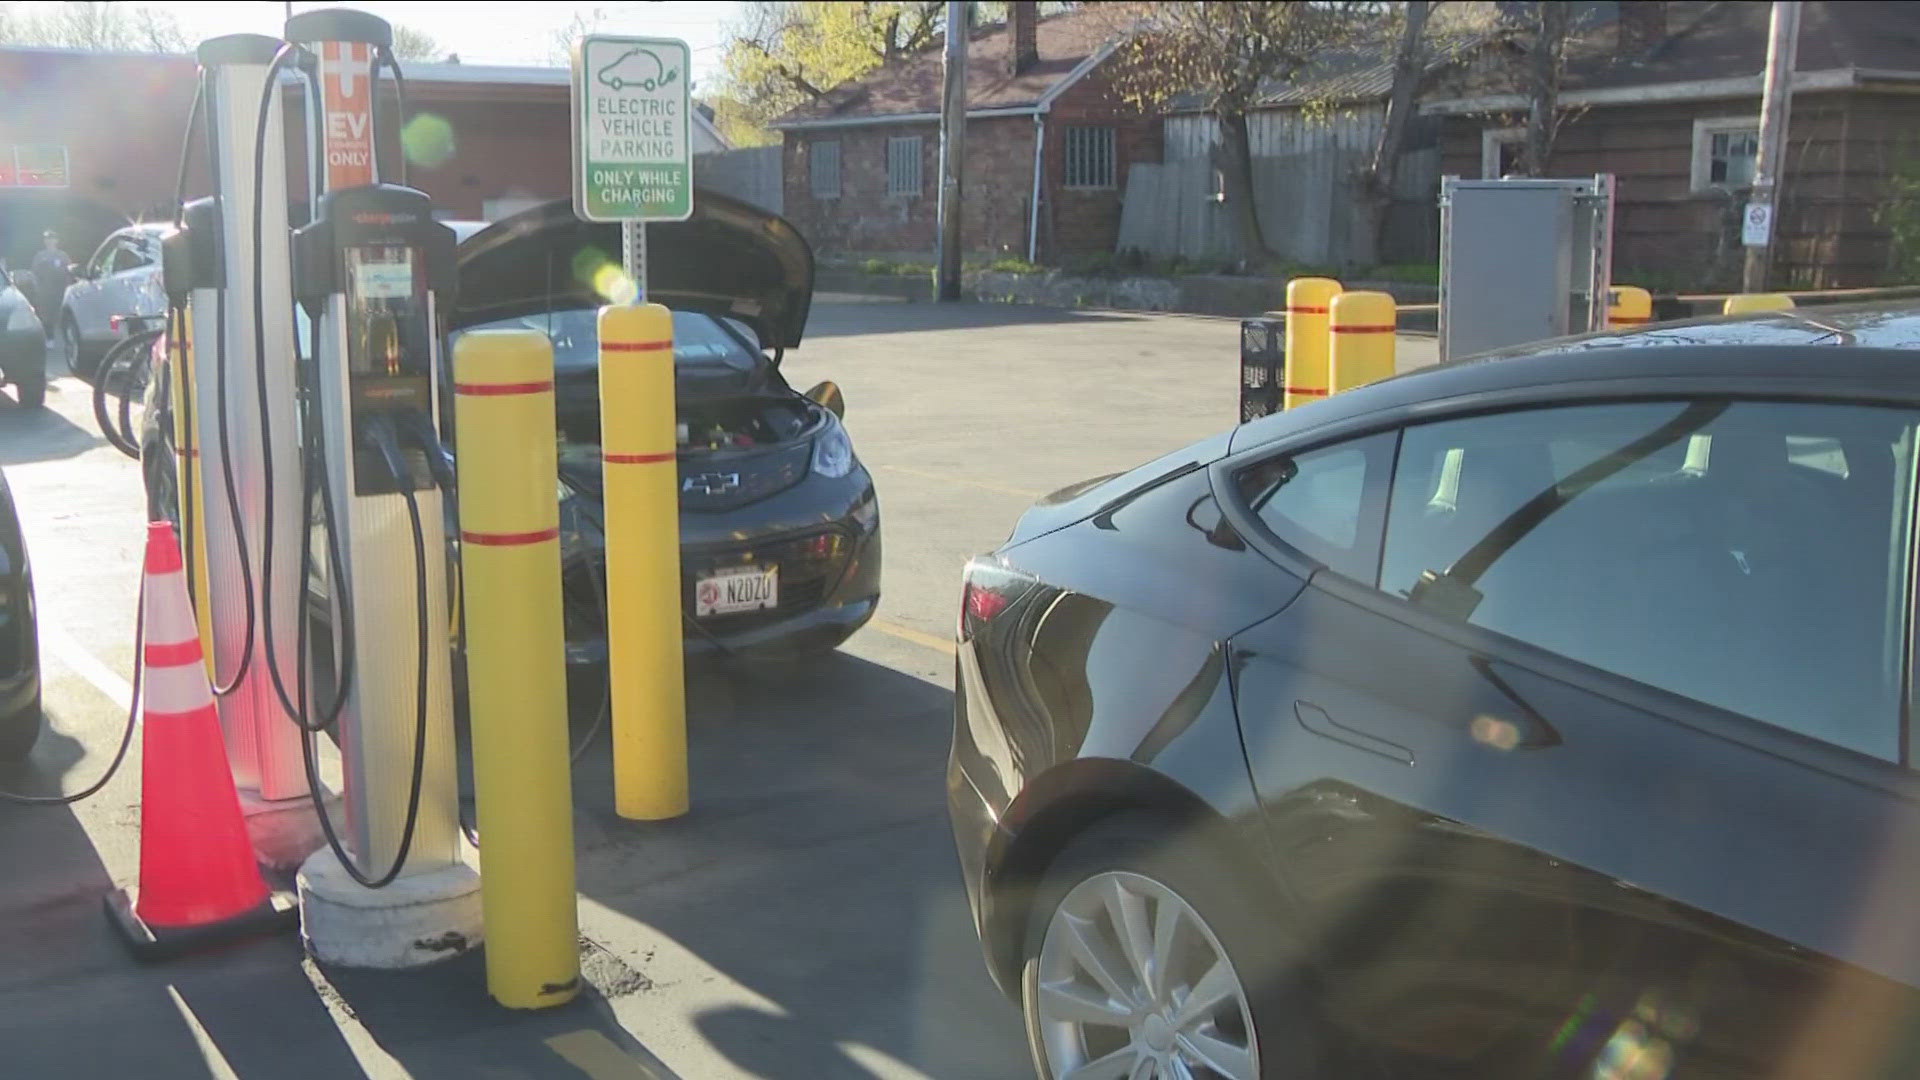 To celebrate Earth Week and Drive Electric Earth Month, local EV enthusiasts invited the community out to learn more about making the switch.